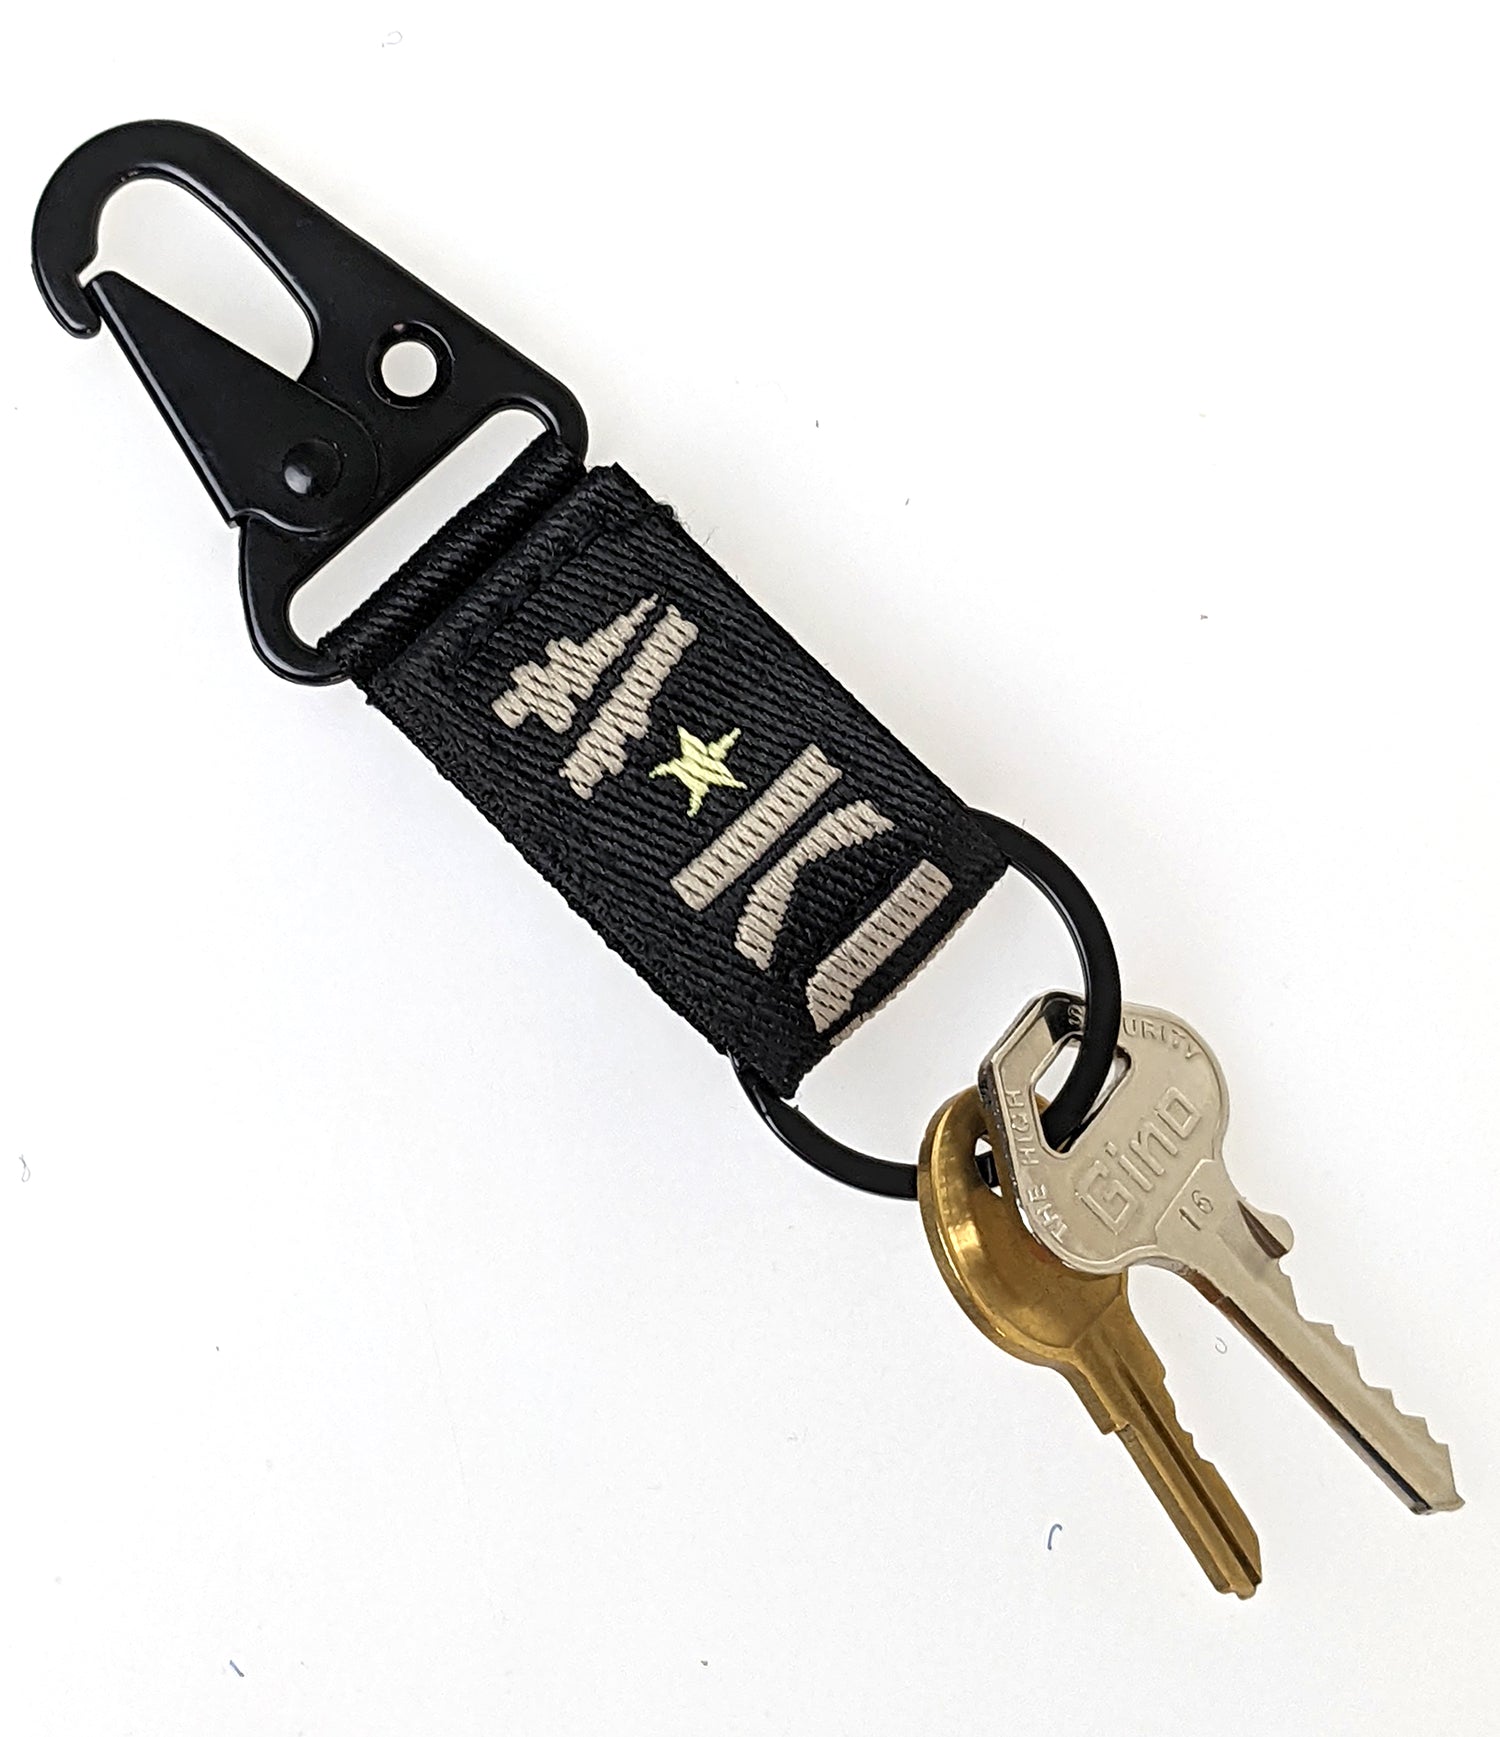 Belt Key Holders and Key Rings | Carry keys on your pants or belt